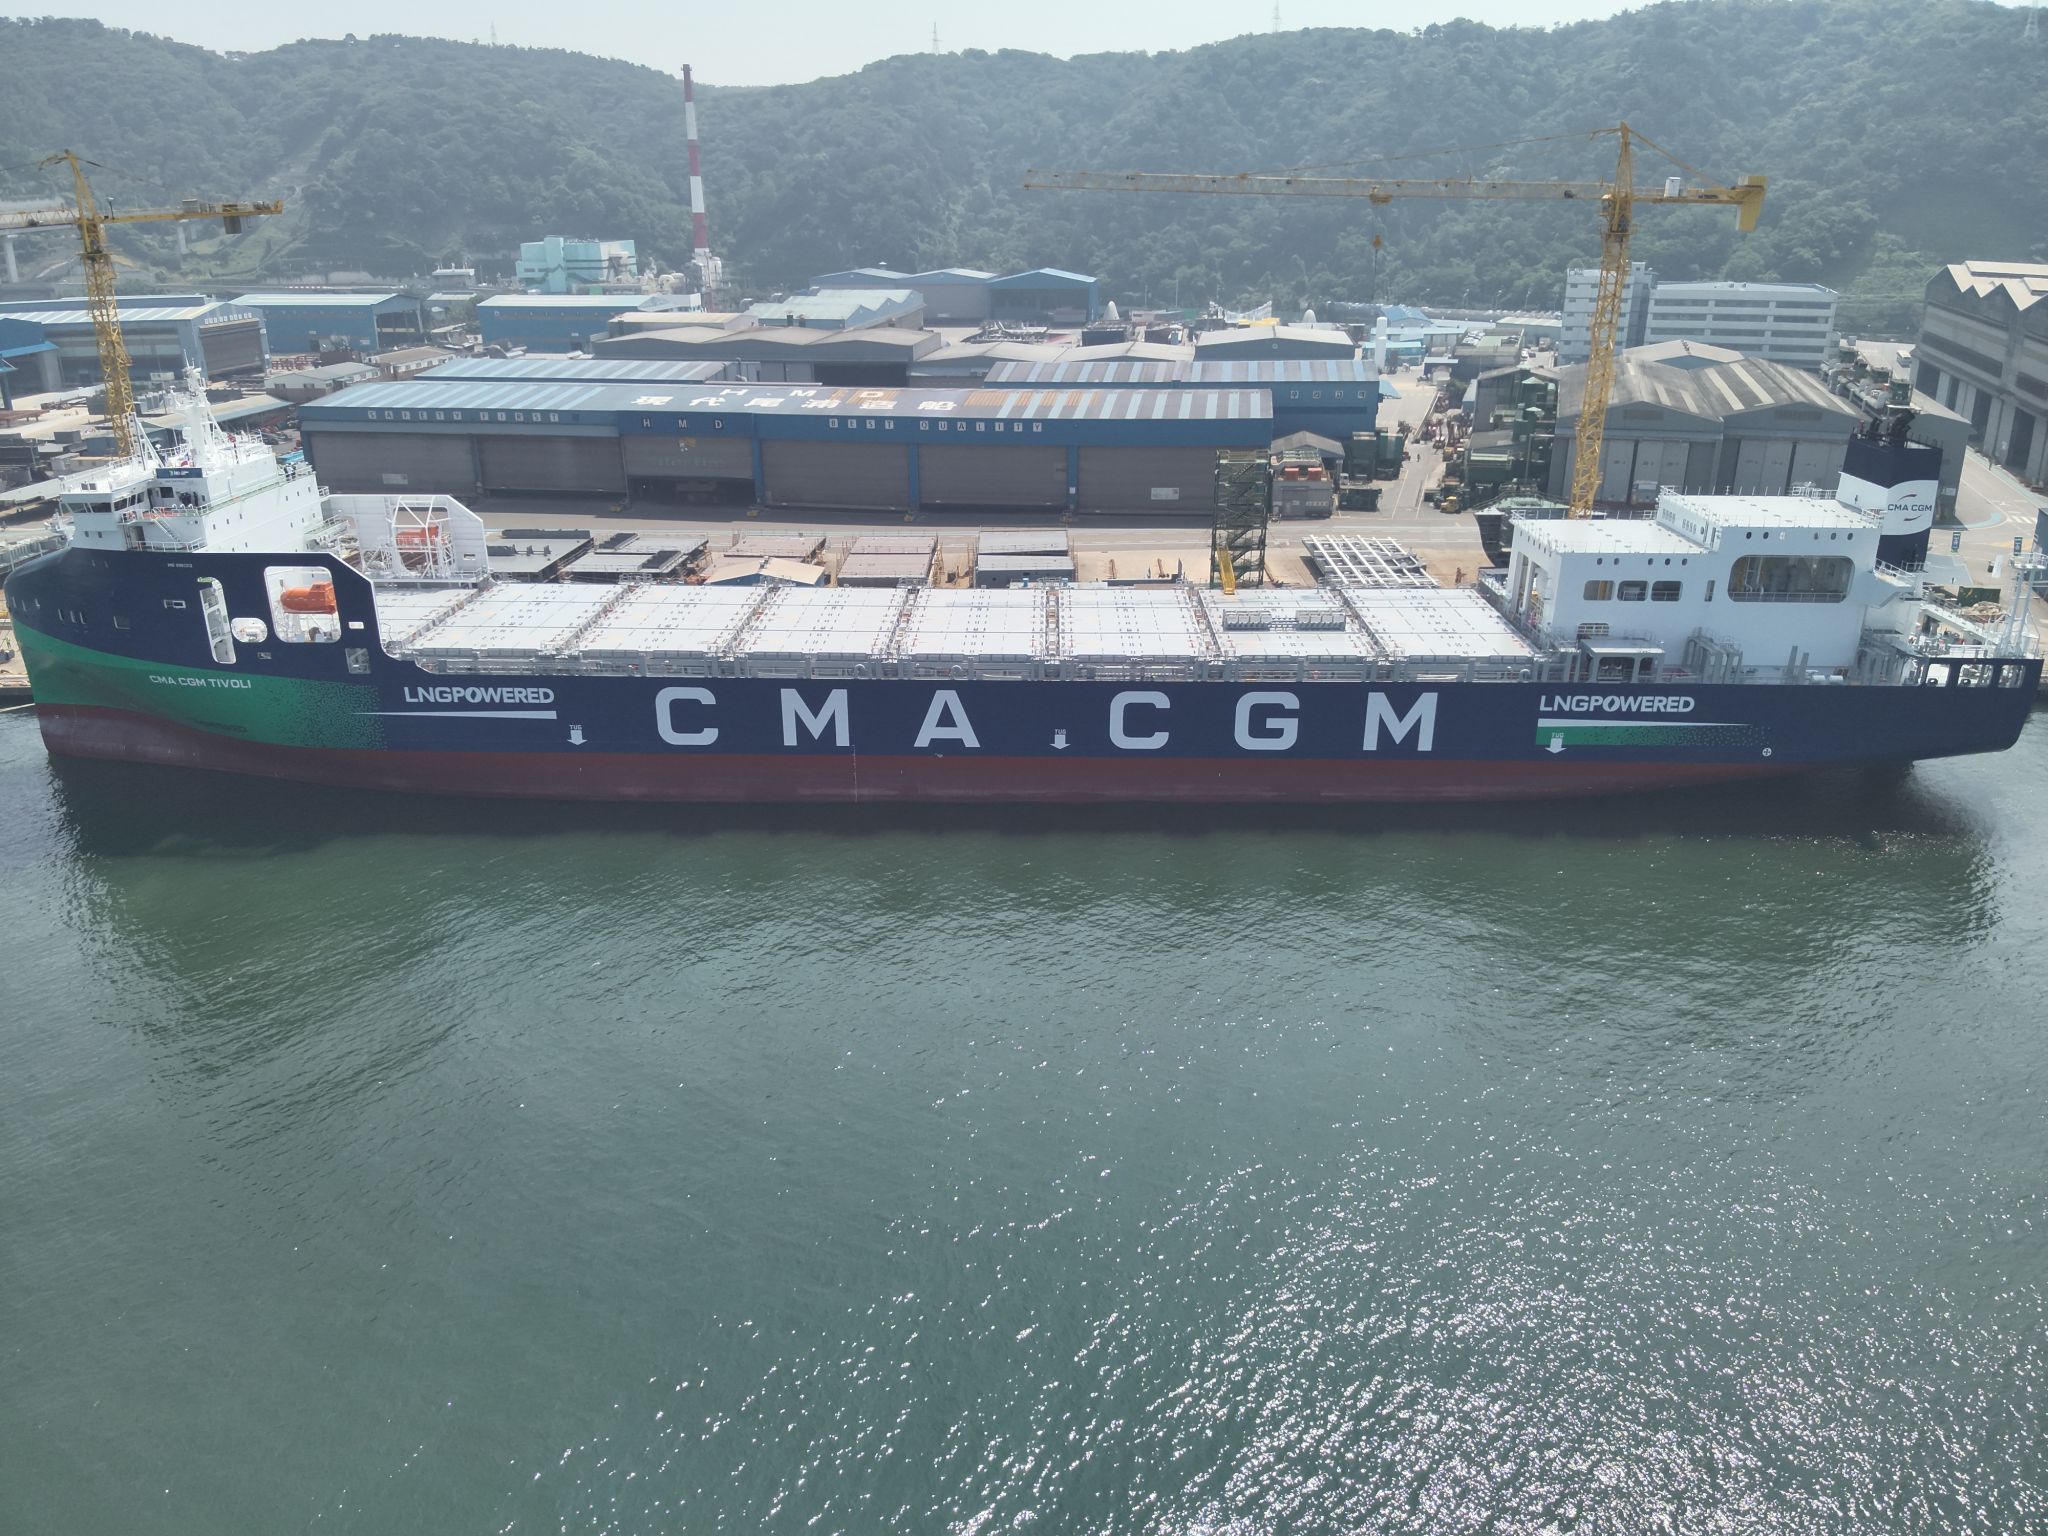 CMA CGM takes delivery of new LNG-powered feeder vessel